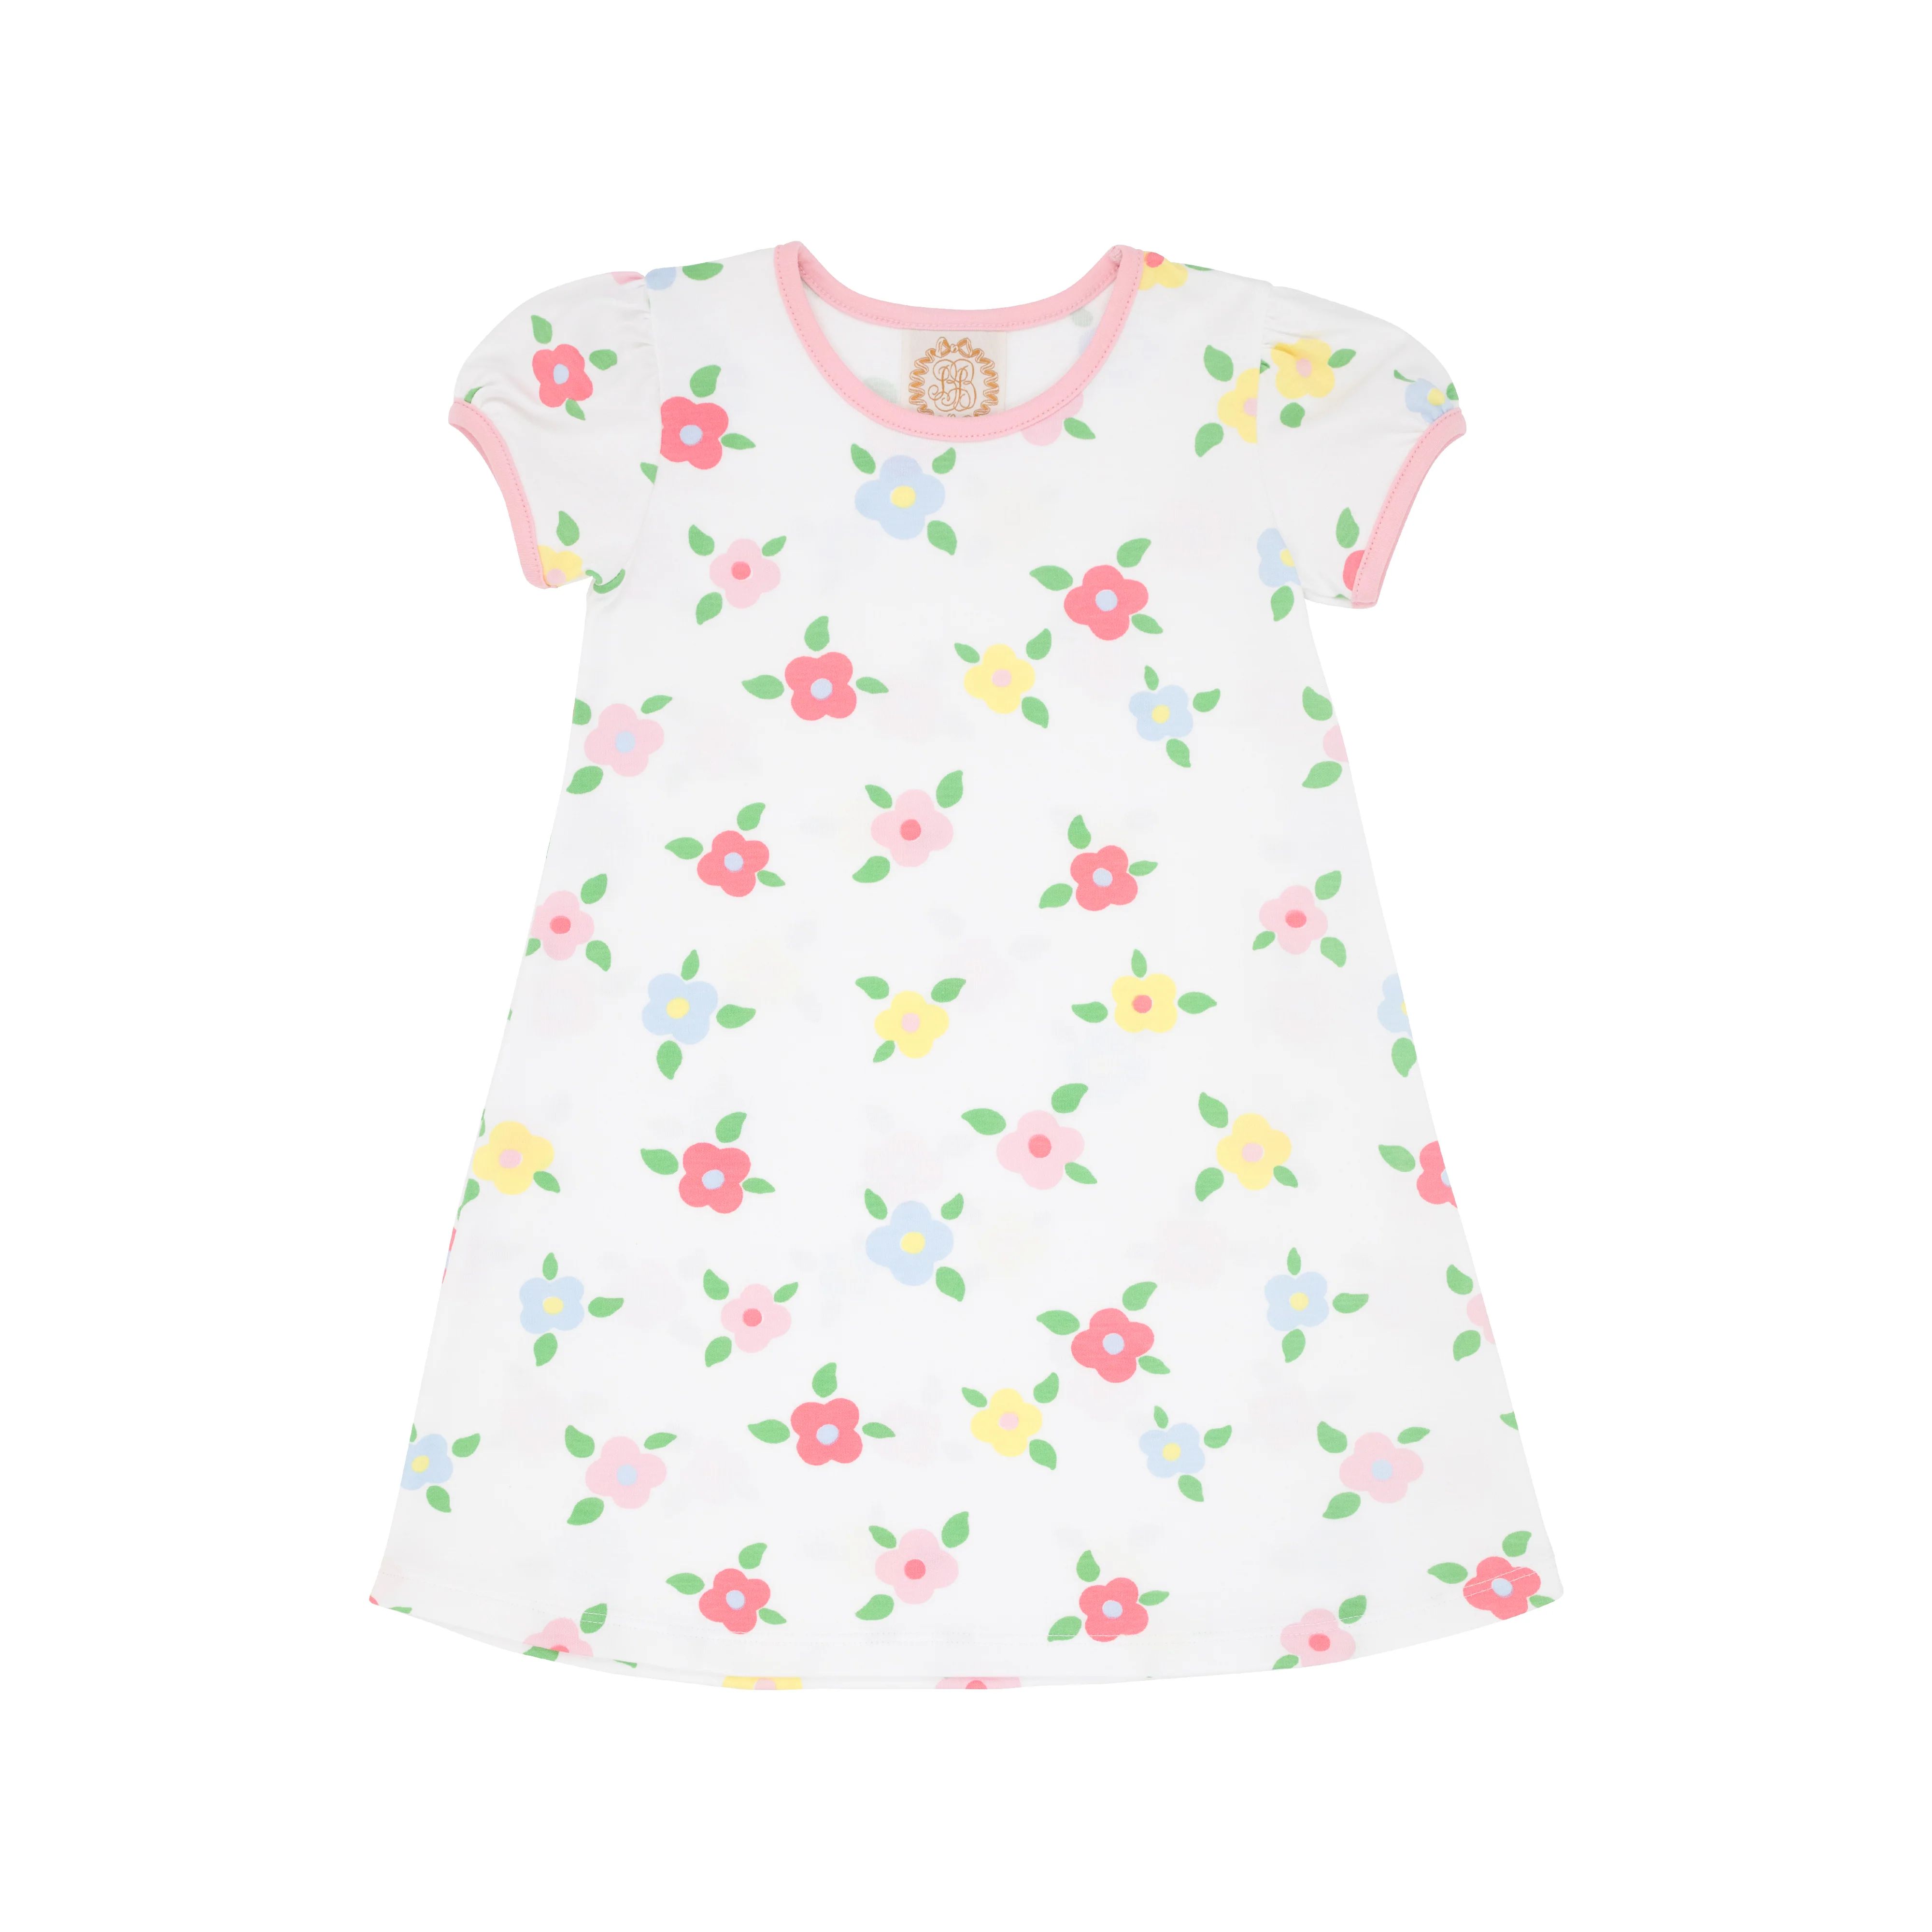 Penny's Play Dress - Little Gasparilla Garden with Sandpearl Pink | The Beaufort Bonnet Company